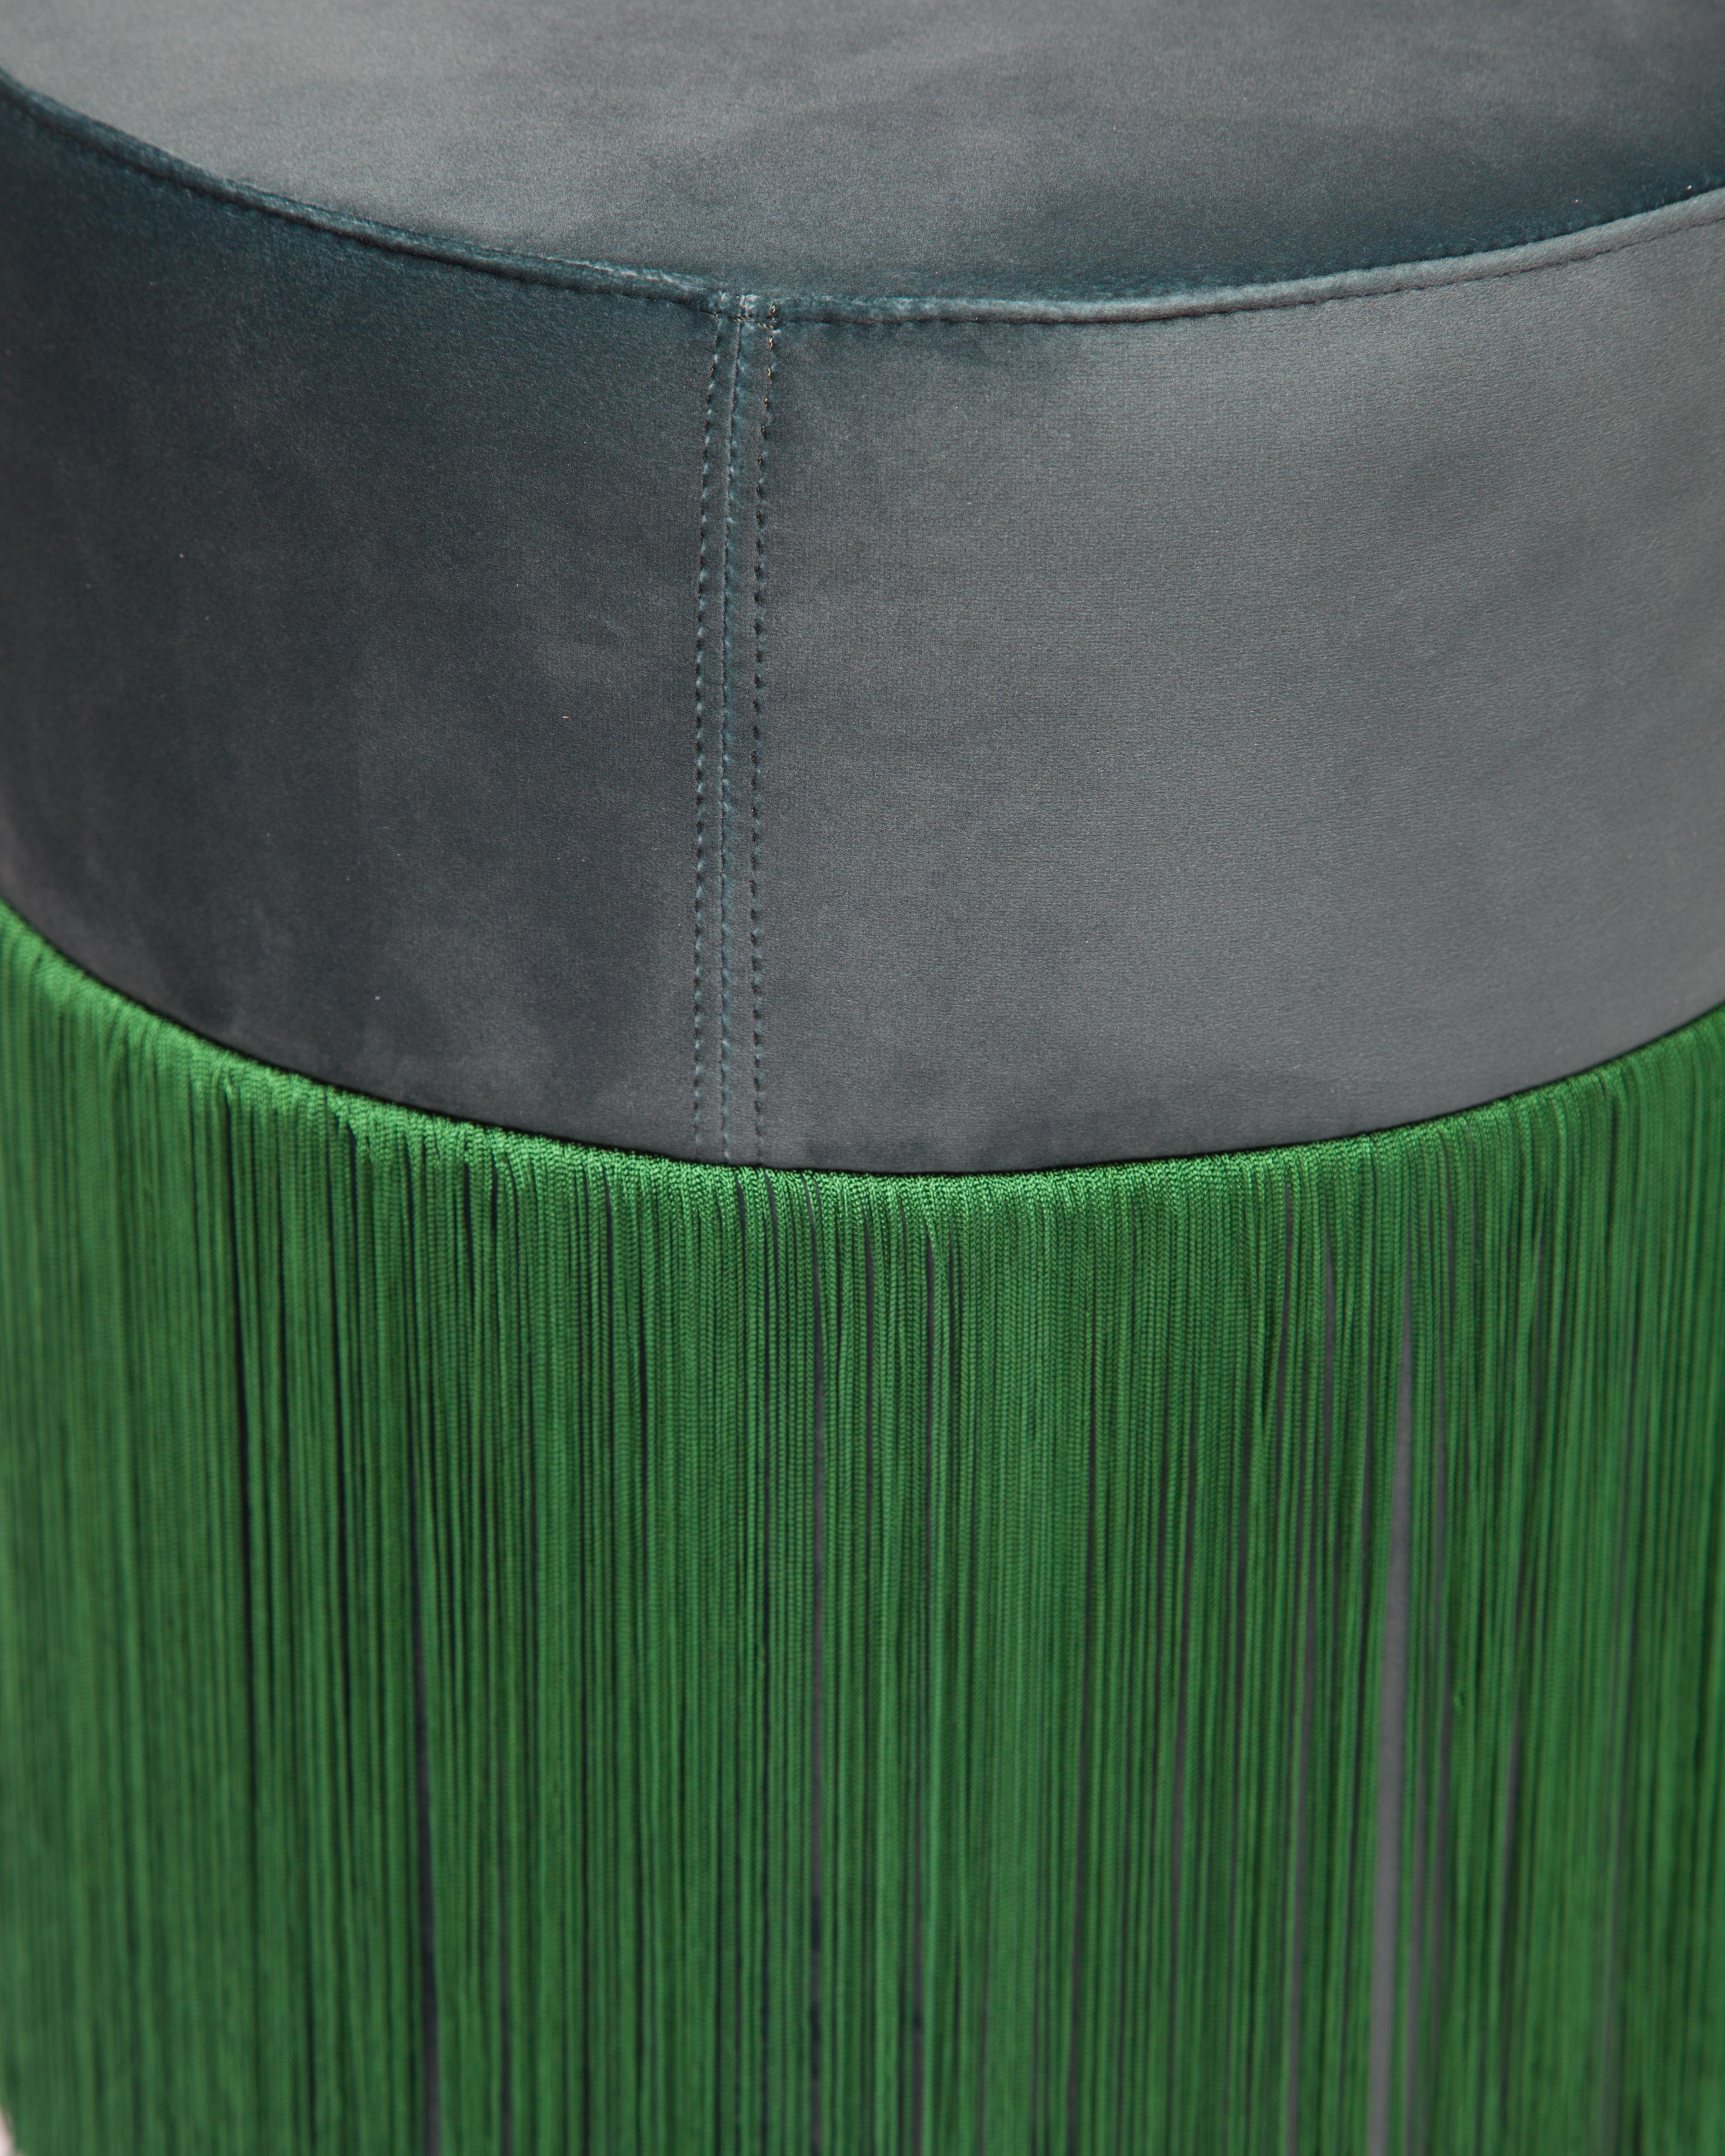 Pair of Pouf Pill Small and Large Emerald Green in Velvet Upholstery and Fringes (Polster) im Angebot